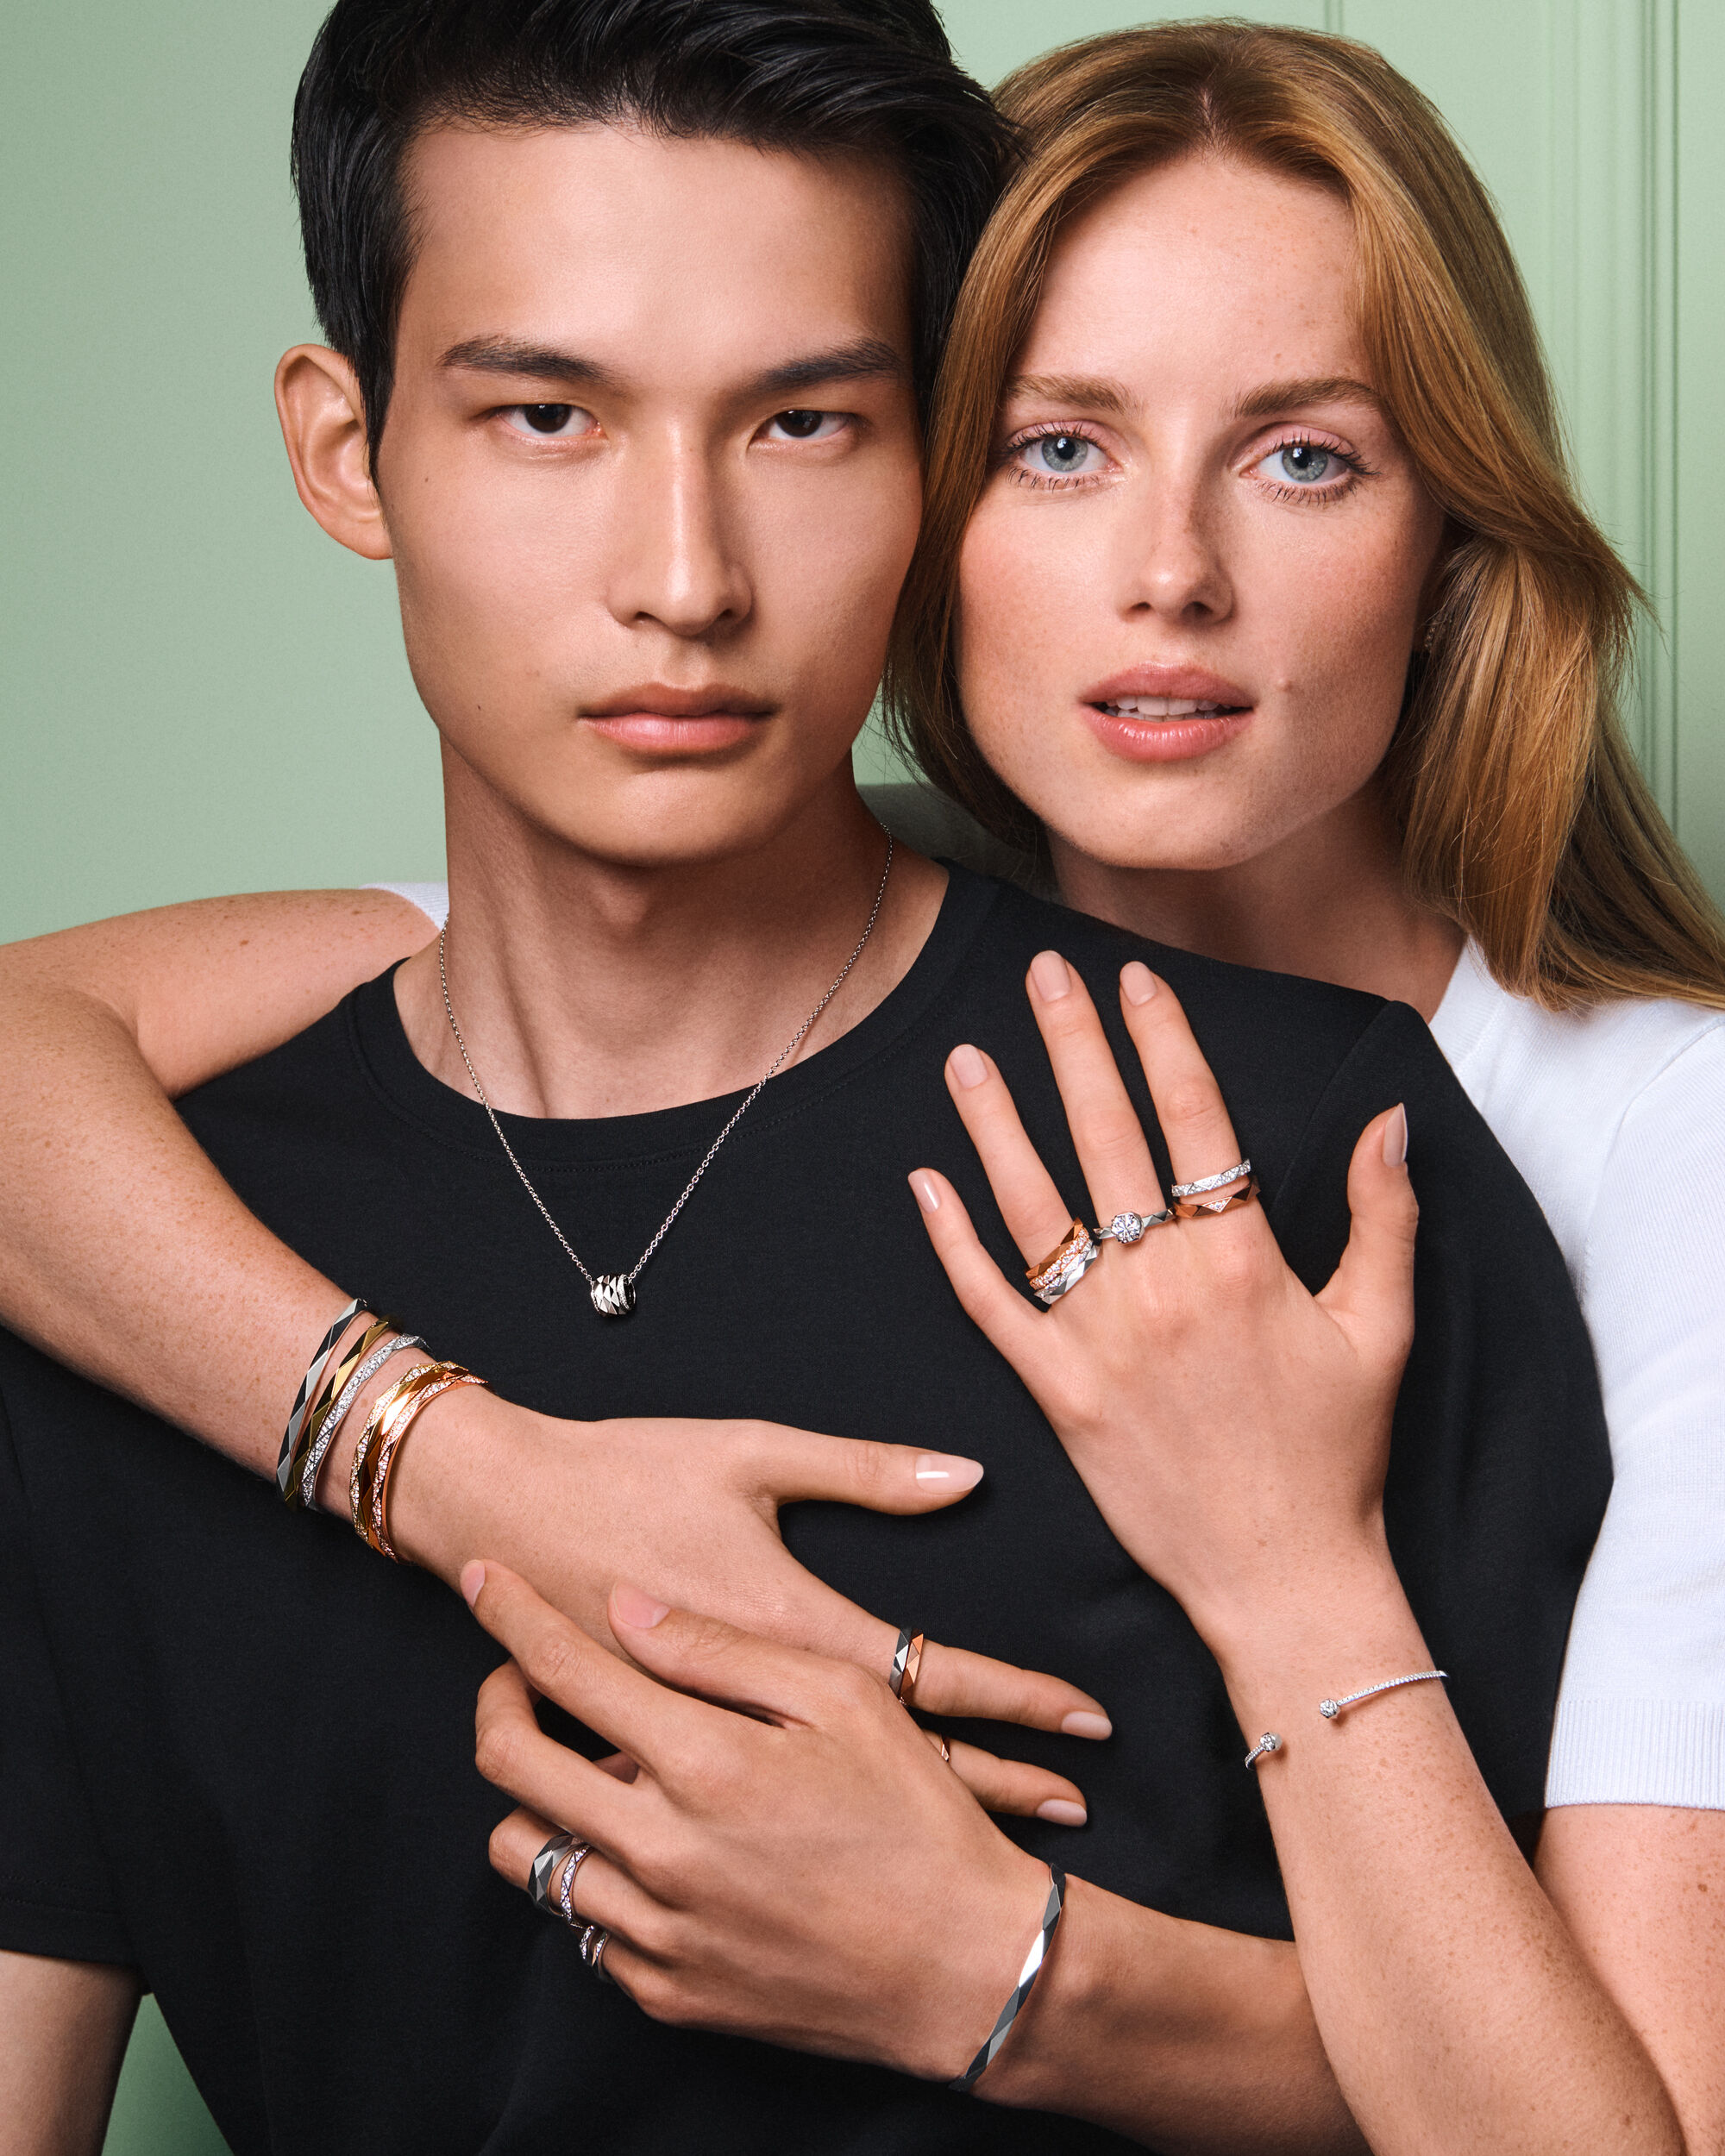 Image of female and male model wearing Laurence Graff Signature jewellery pieces